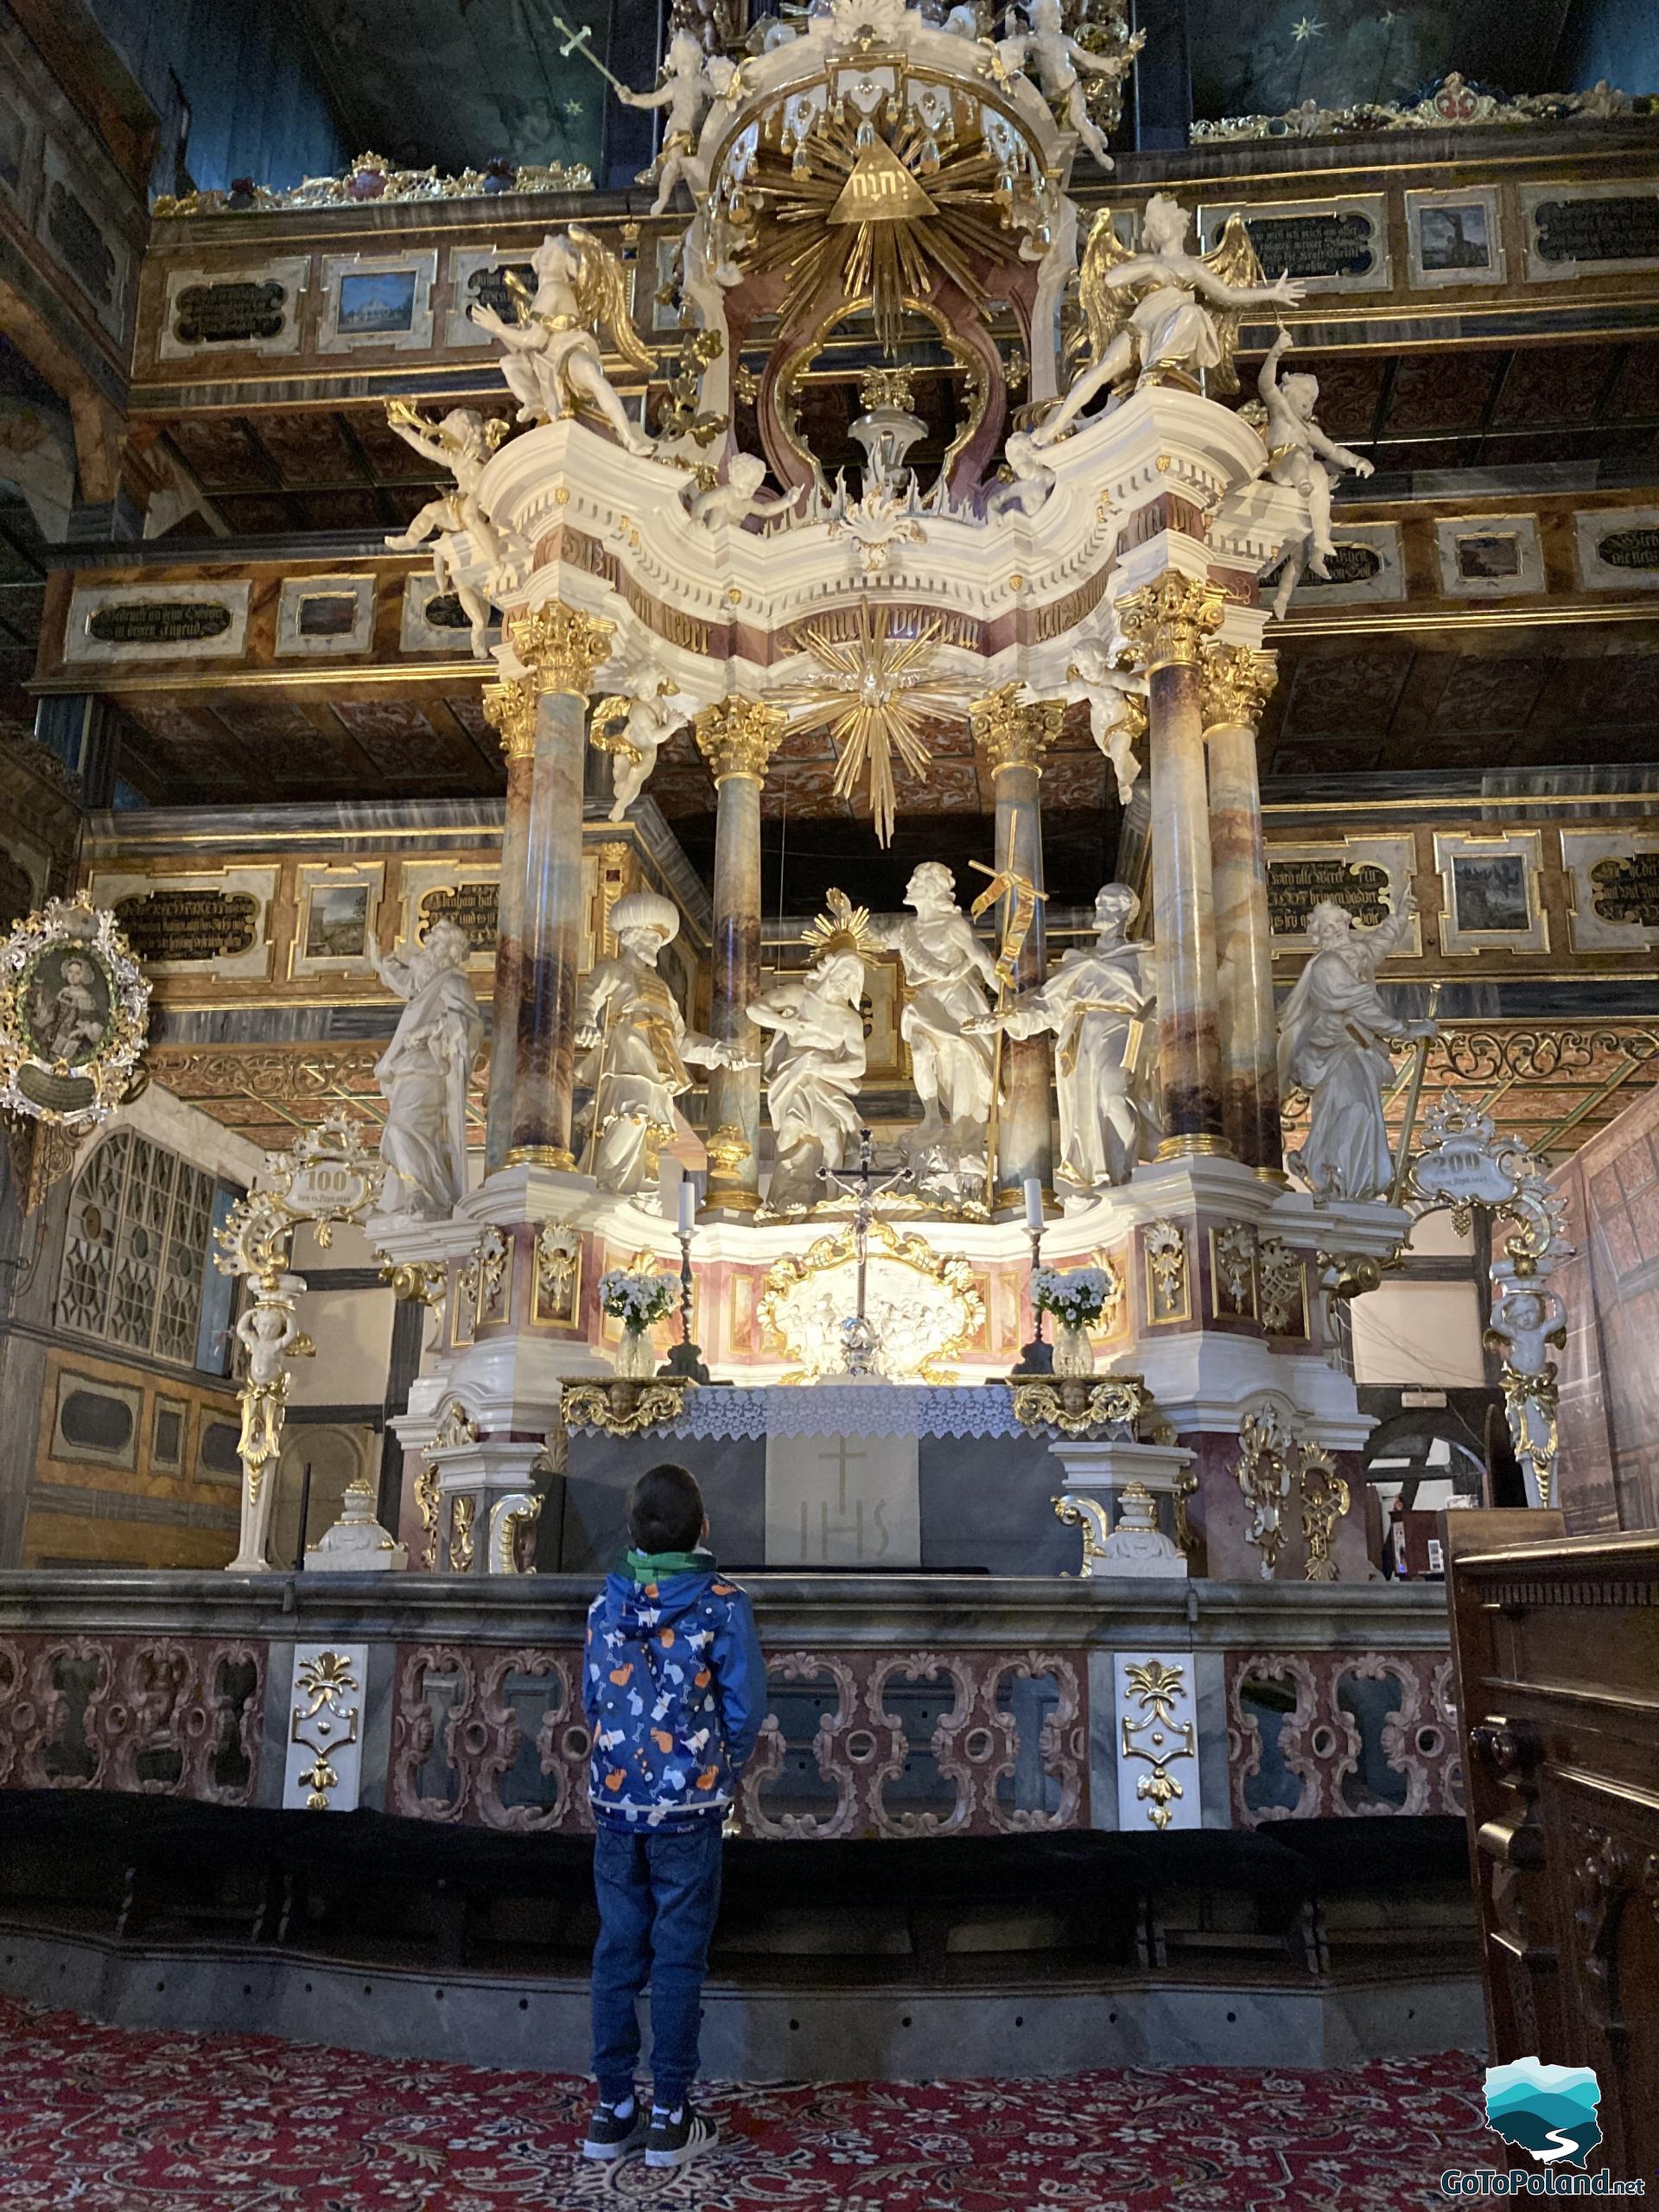 A boy is looking at the main altar. This altar was made of wood